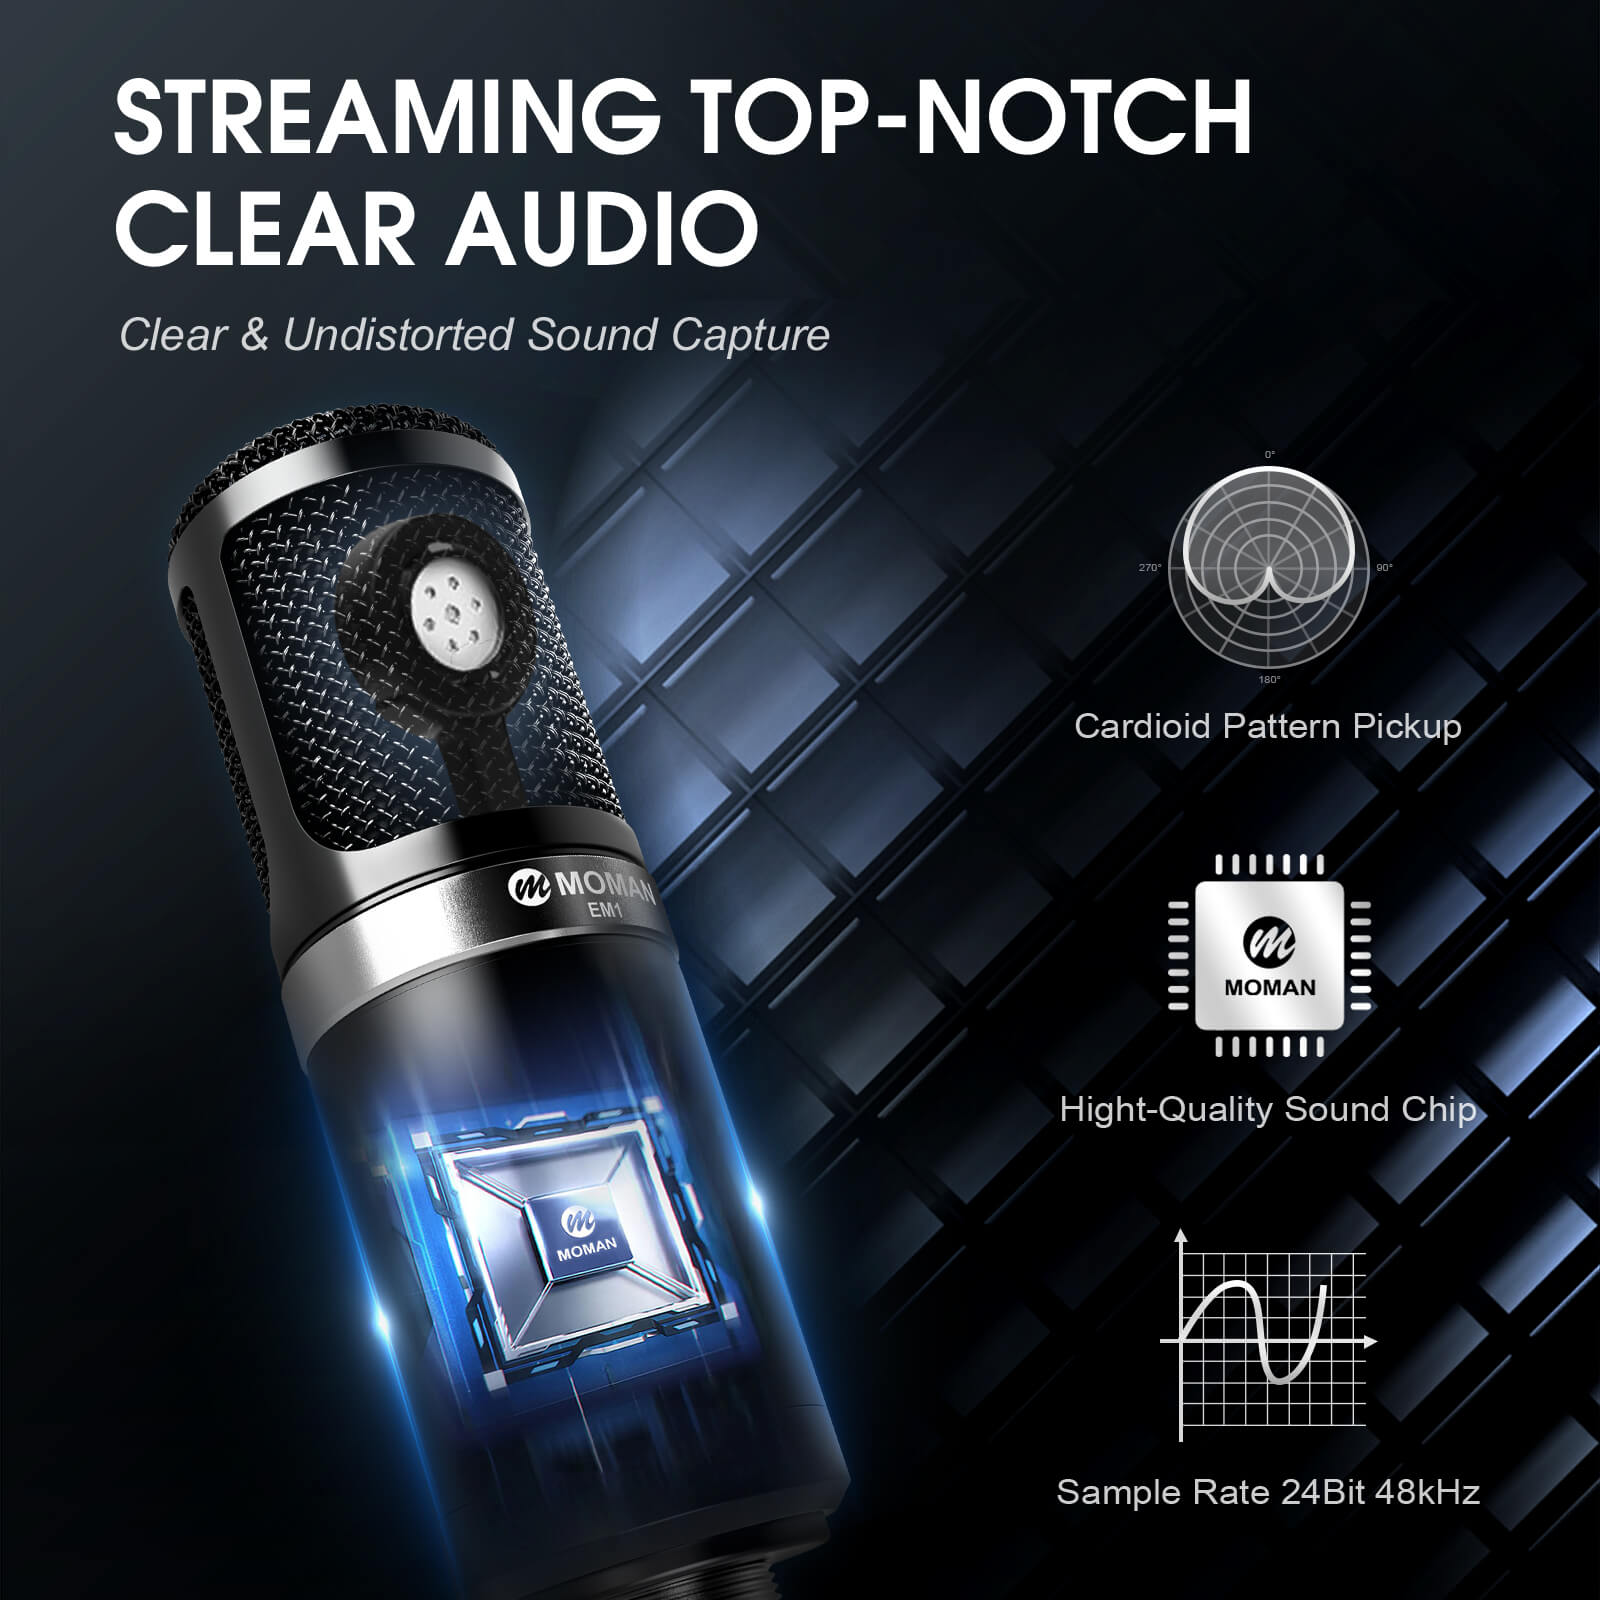 Moman EM1 PC microphone for streaming top-notch clear audio